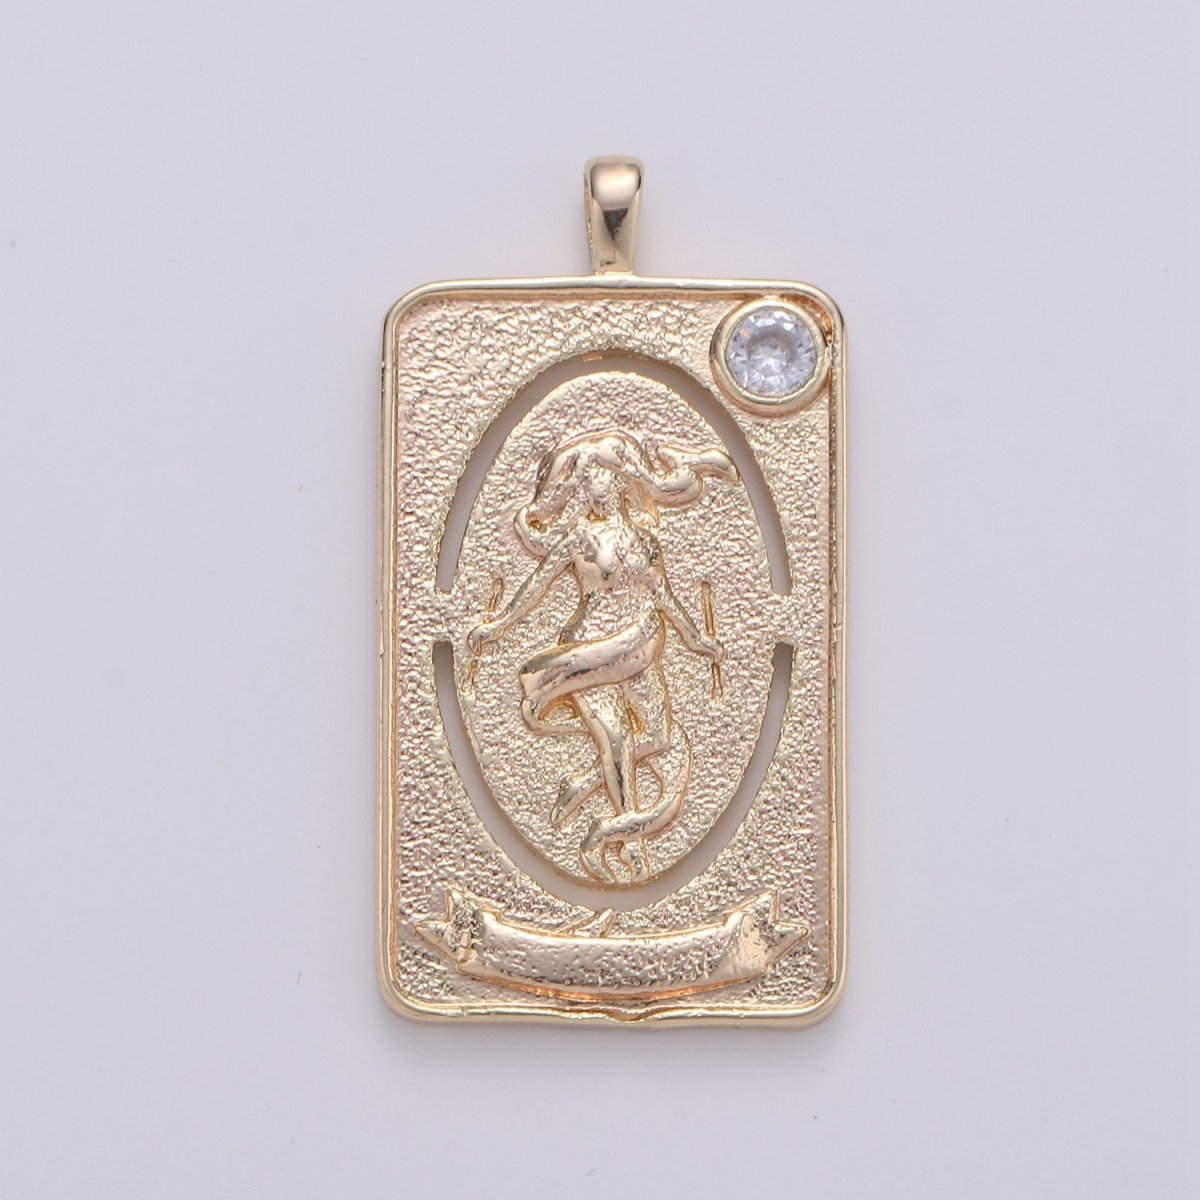 14k Gold Filled Tarot Card Charm - The World Tarot Card Pendant, Amulet Jewelry for Necklace Component Supply I-859 - DLUXCA